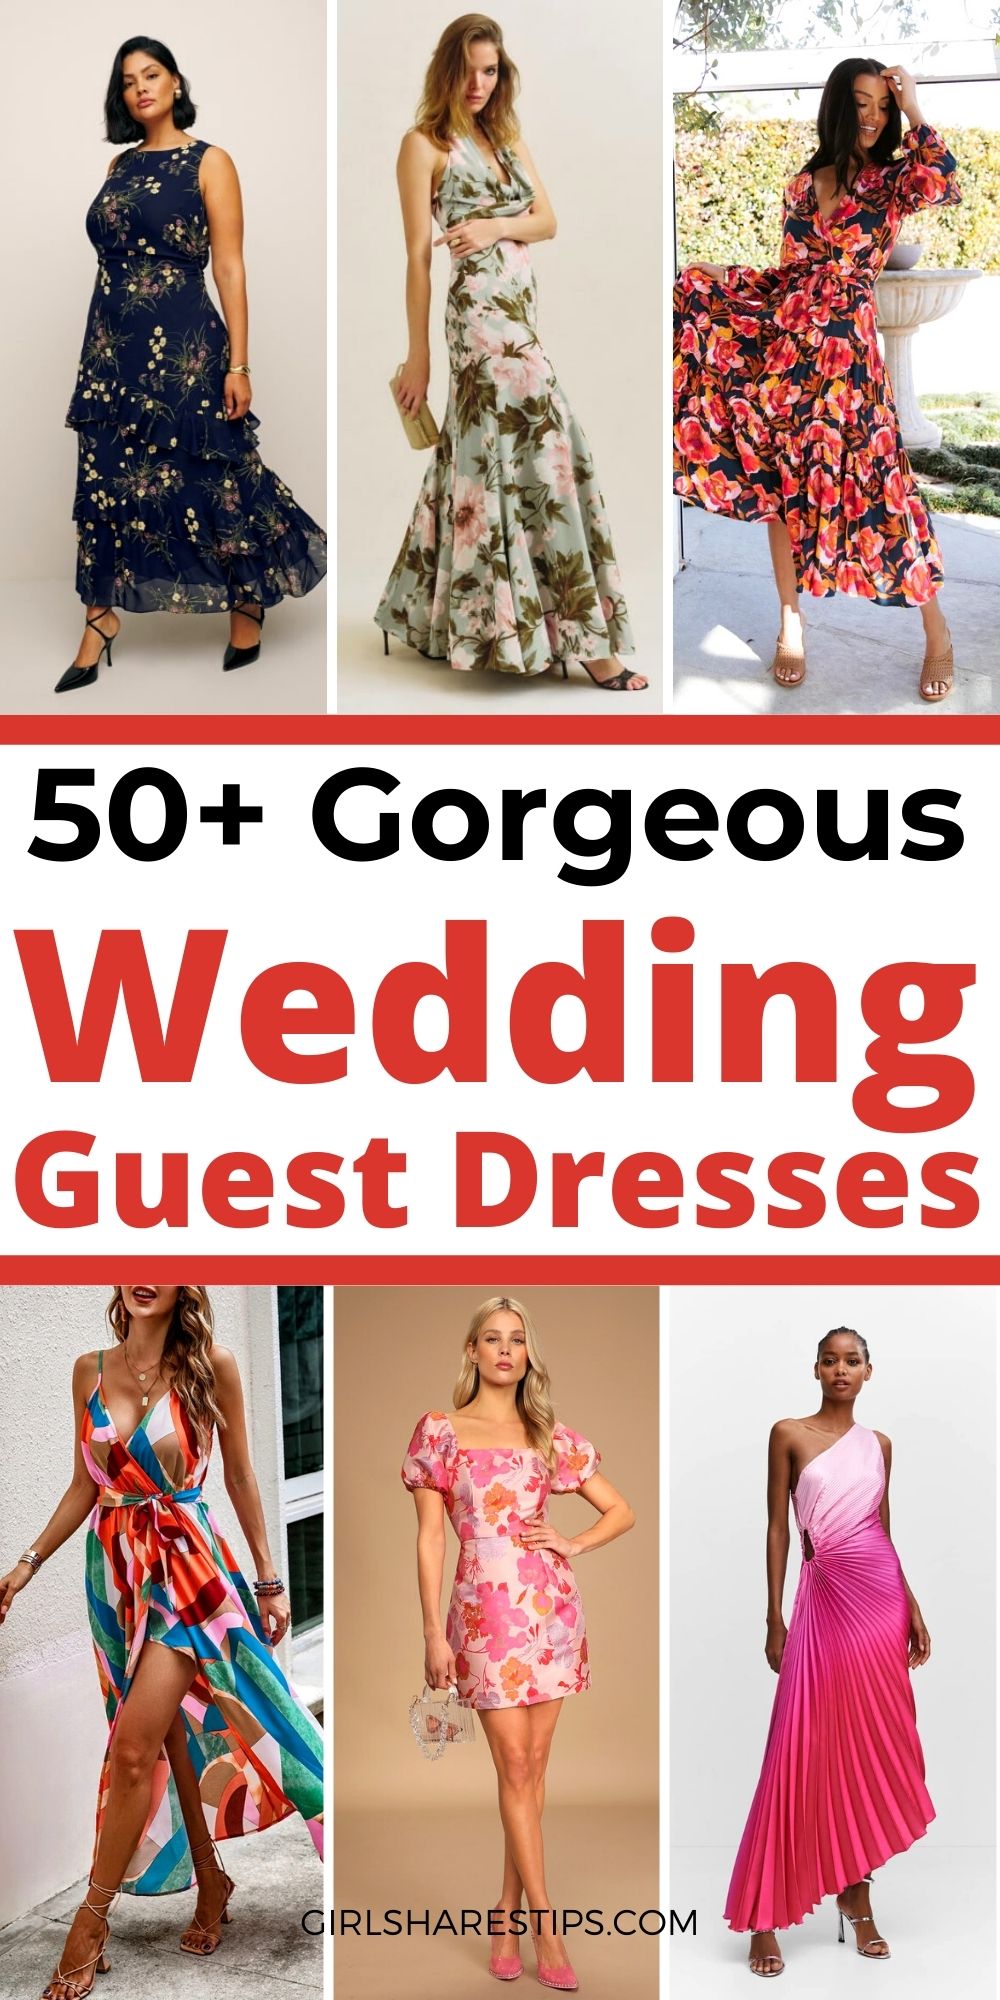 wedding guest dresses collage